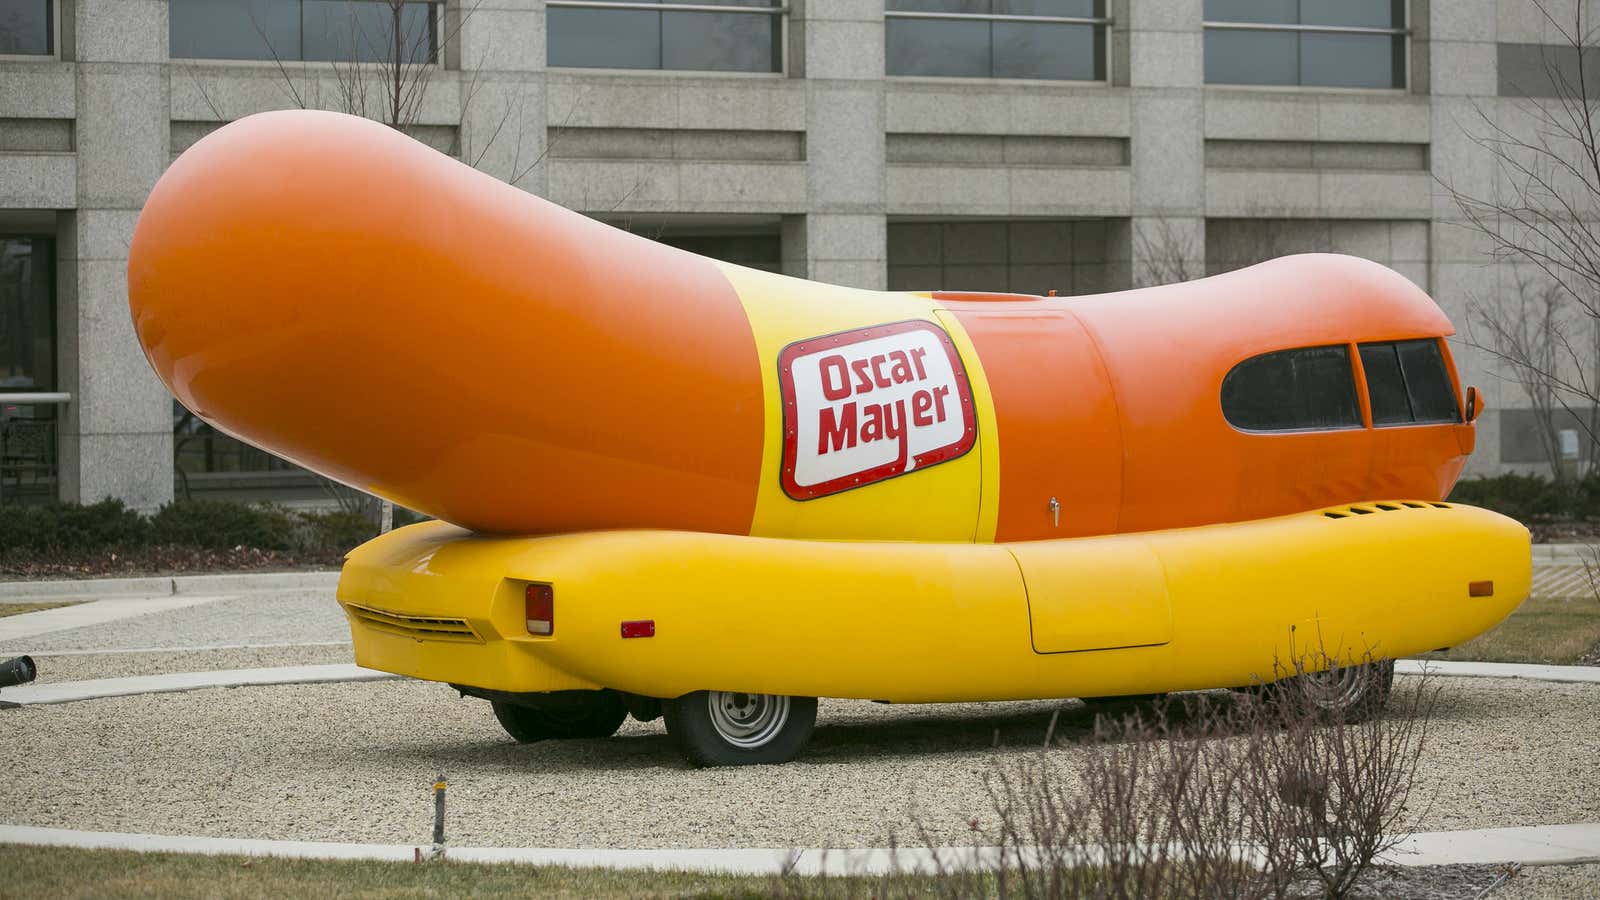 Is the Weinermobile headed for Brazil?